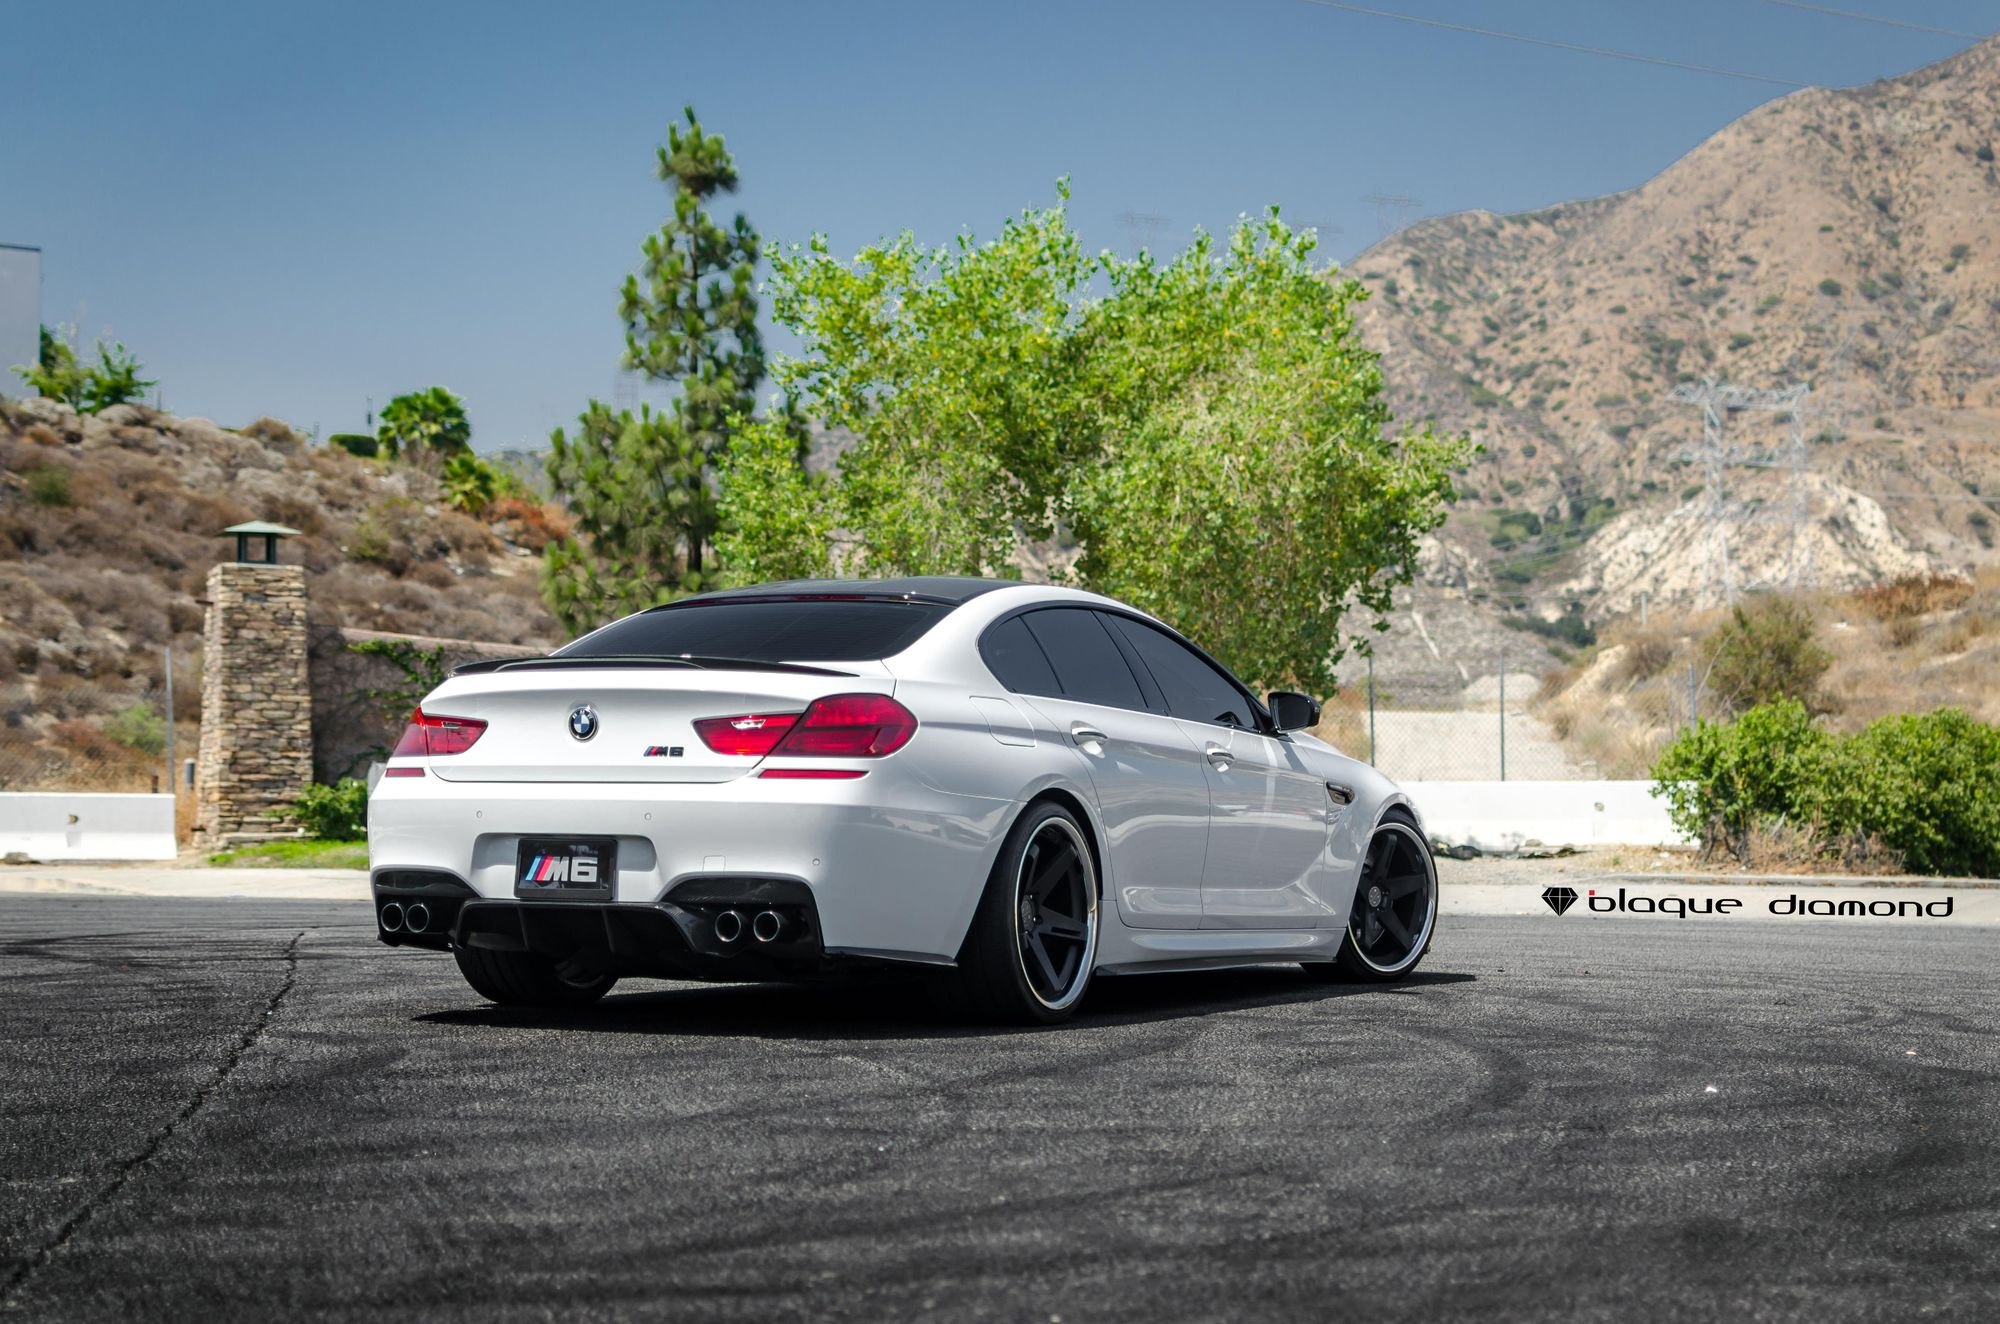 White BMW 6-Series with Carbon Fiber Rear Diffuser - Photo by Blaque Diamond